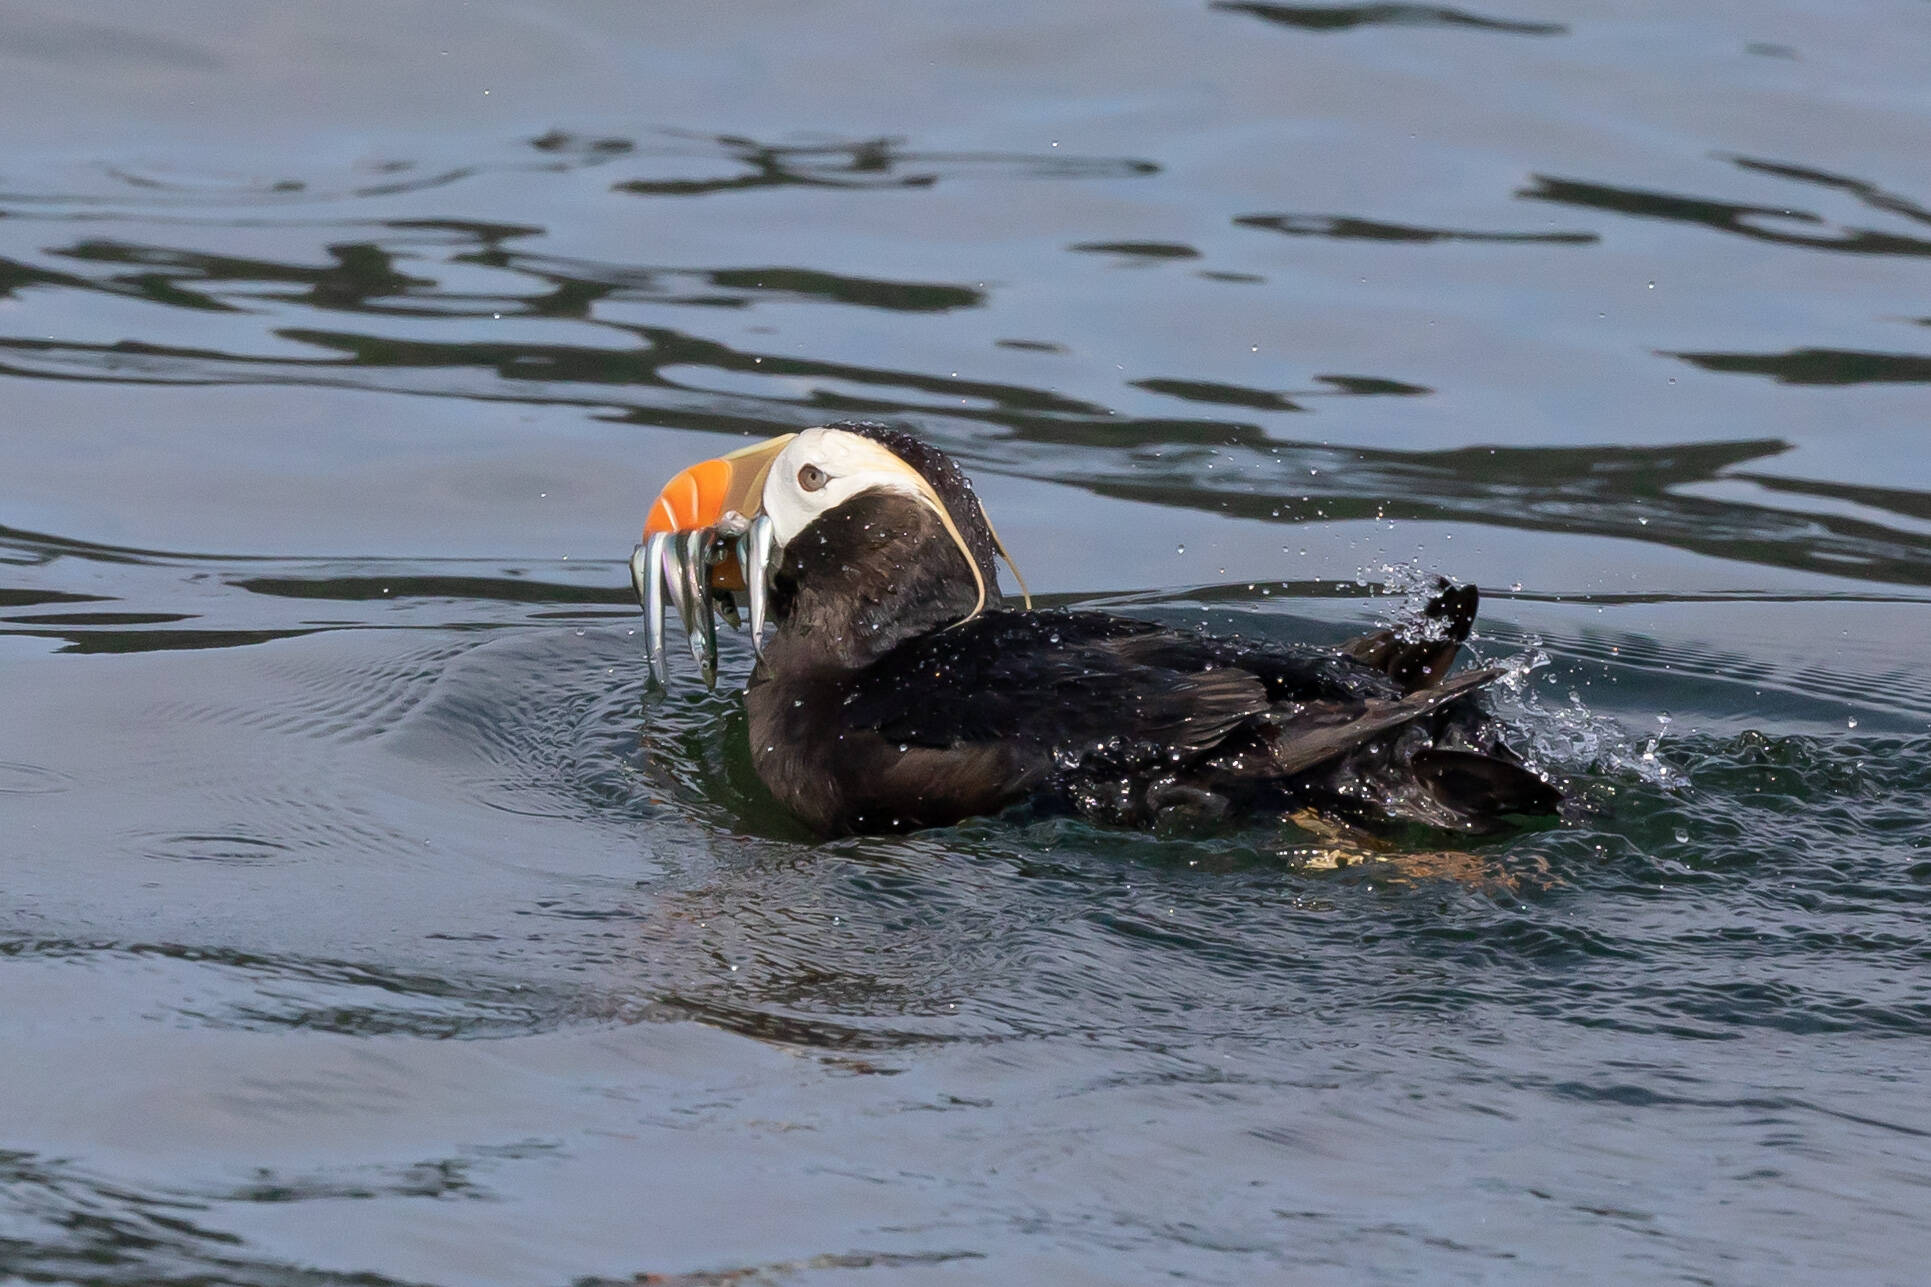 A tufted puffin can hold many fish in its beak with a raspy tongue before carrying them to its cliffside burrows to feed its puffling. Both parents take turns raising the single puffling. If the puffling dies, the mother does not have the capacity to lay another egg that year, according to Peter Hodum, professor at the University of Puget Sound. (Photo courtesy of Scott Pearson)